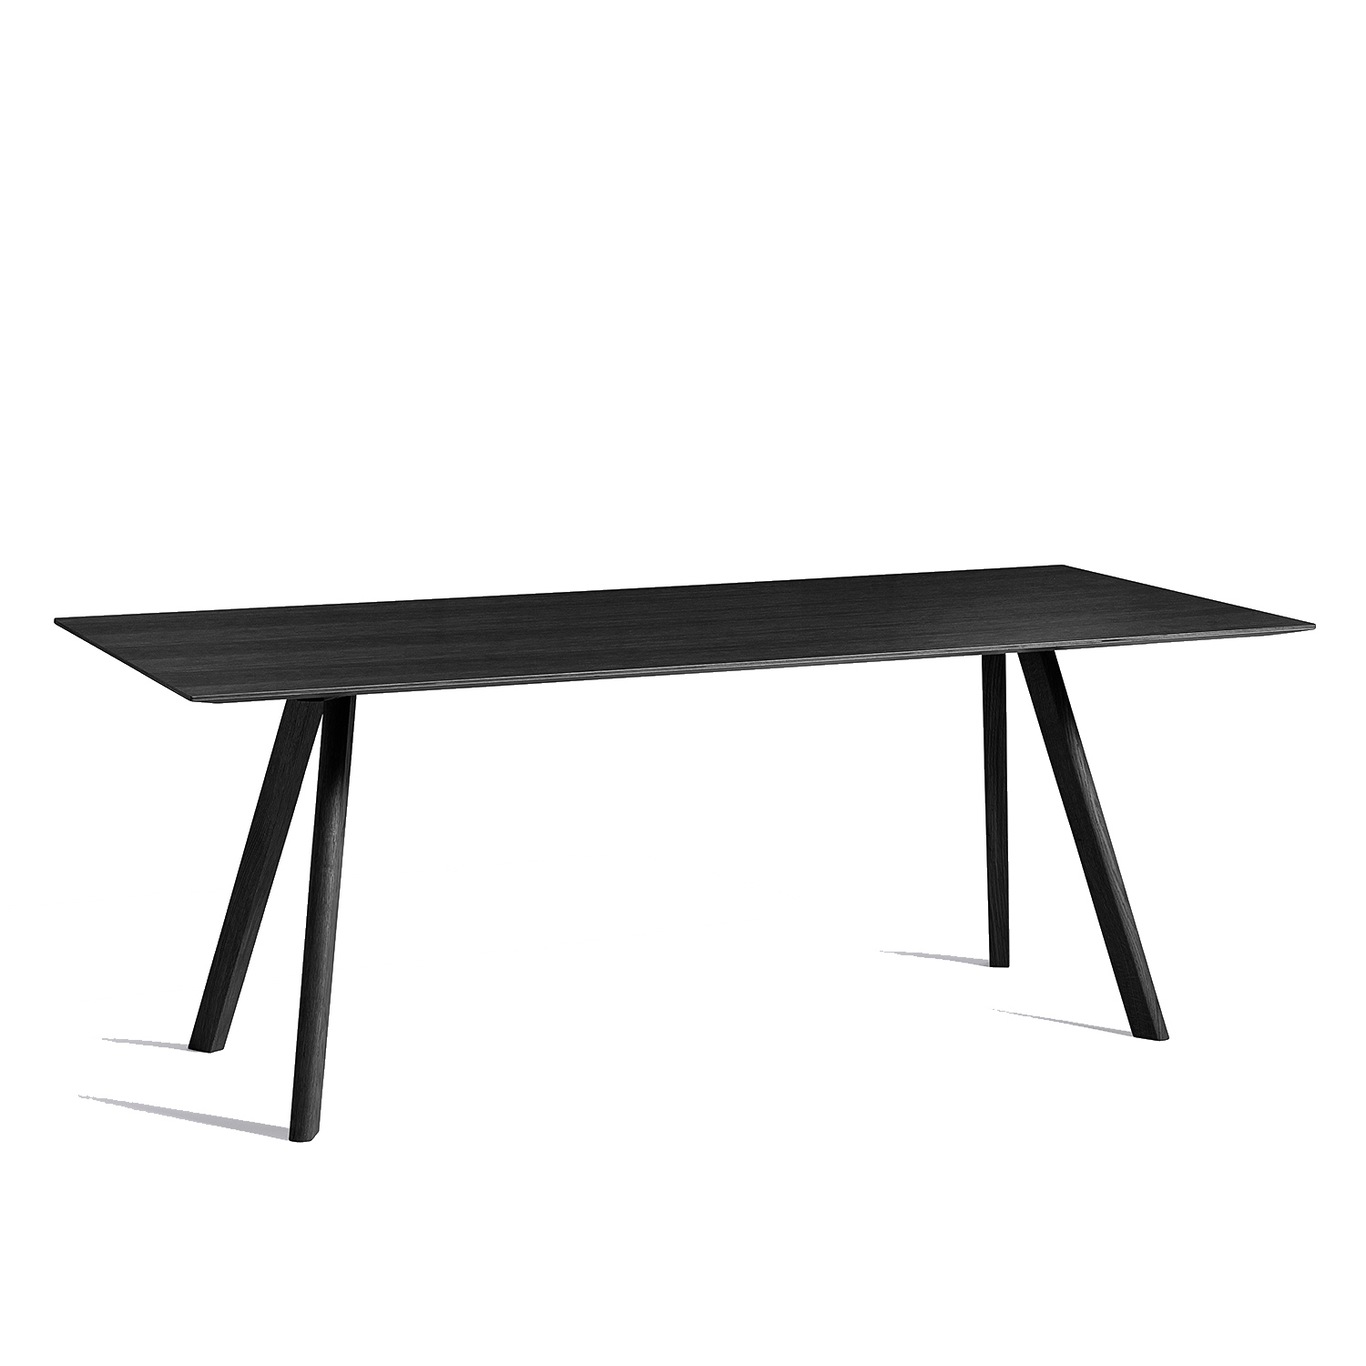 CPH 30 Table 90x200x74 cm, Black Waterbased Lacquered Oak